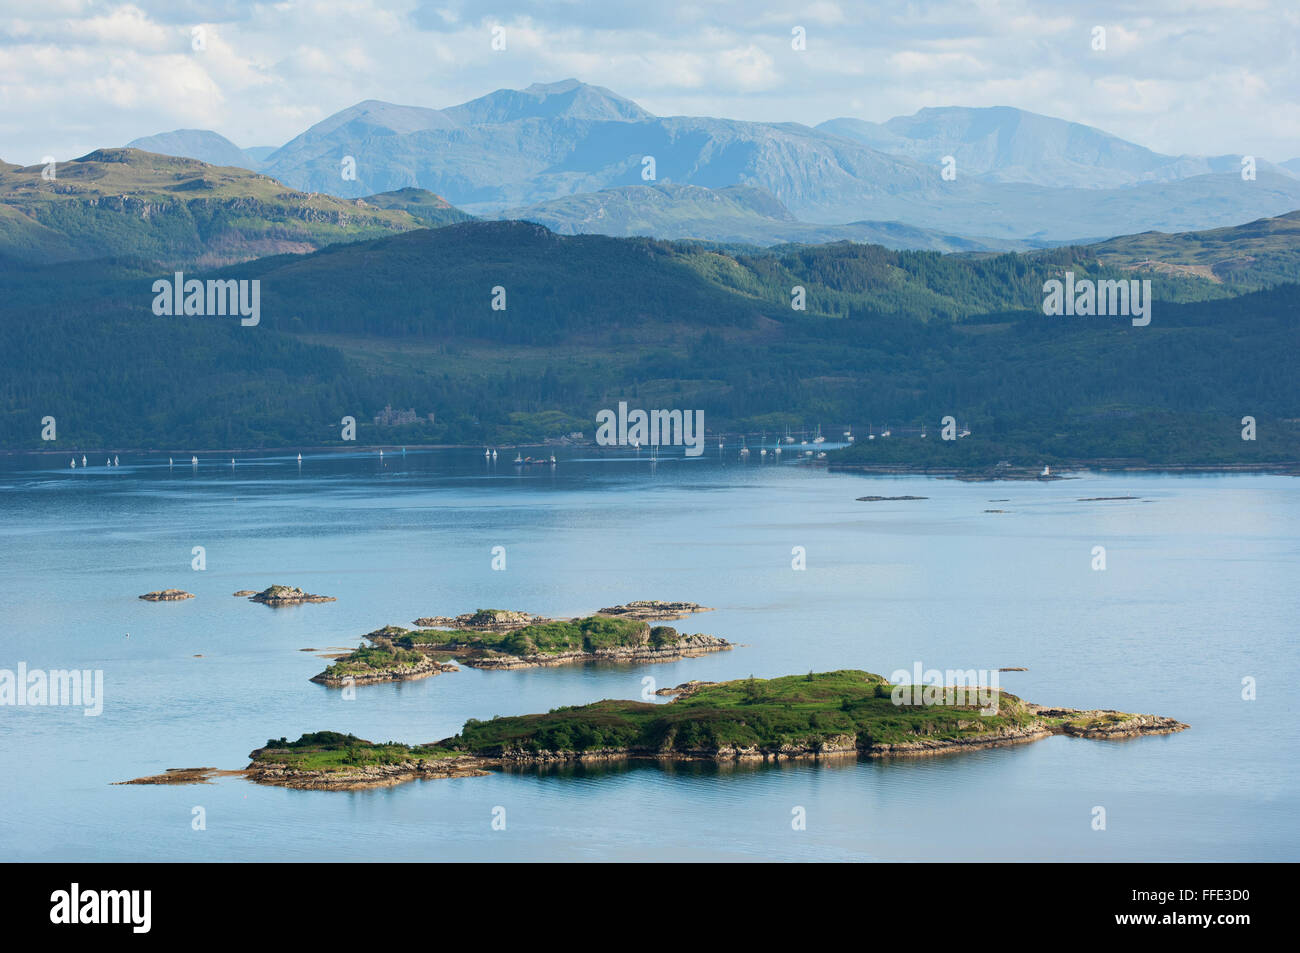 View looking over Loch Carron & Loch Kishorn from the road to Applecross (part of the North Coast 500) - Ross-shire, Scotland. Stock Photo